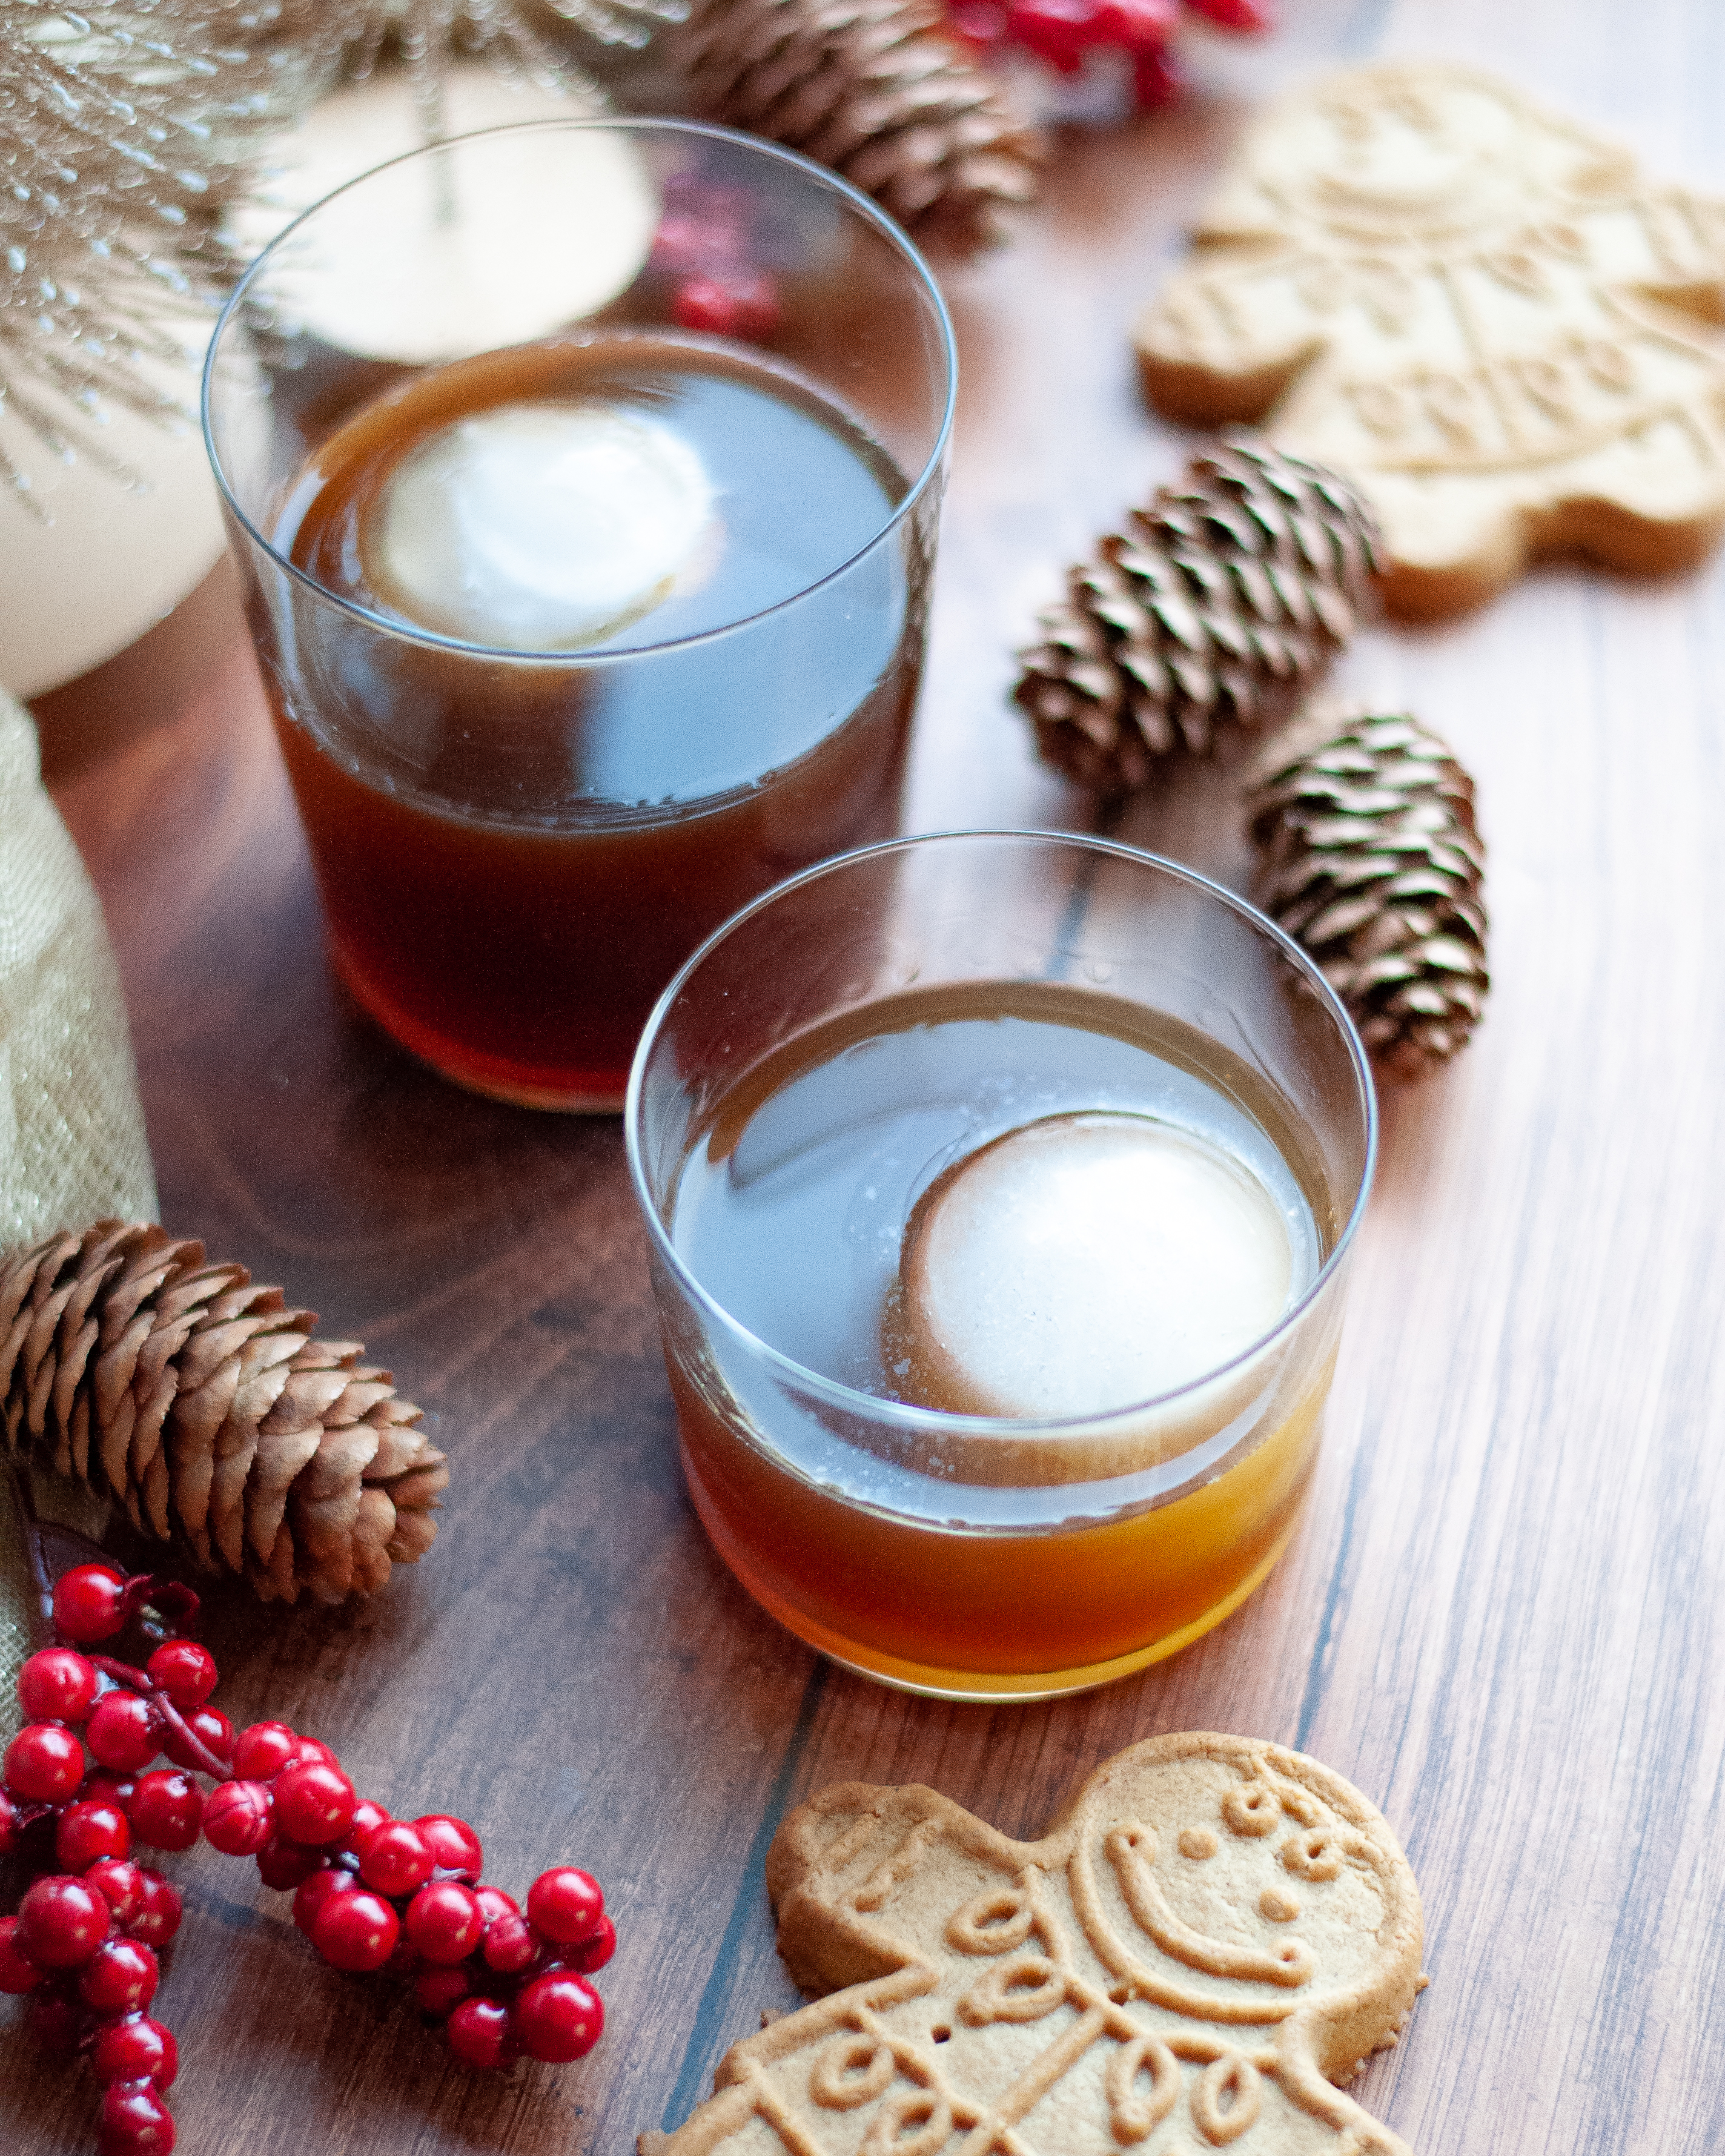 Two gingerbread old fashioneds with ice spheres ready to be drank. The Christmas old fashiond glasses are surrounded by smiling gingerbread cookies, pinecones, red berries, and gold trees.